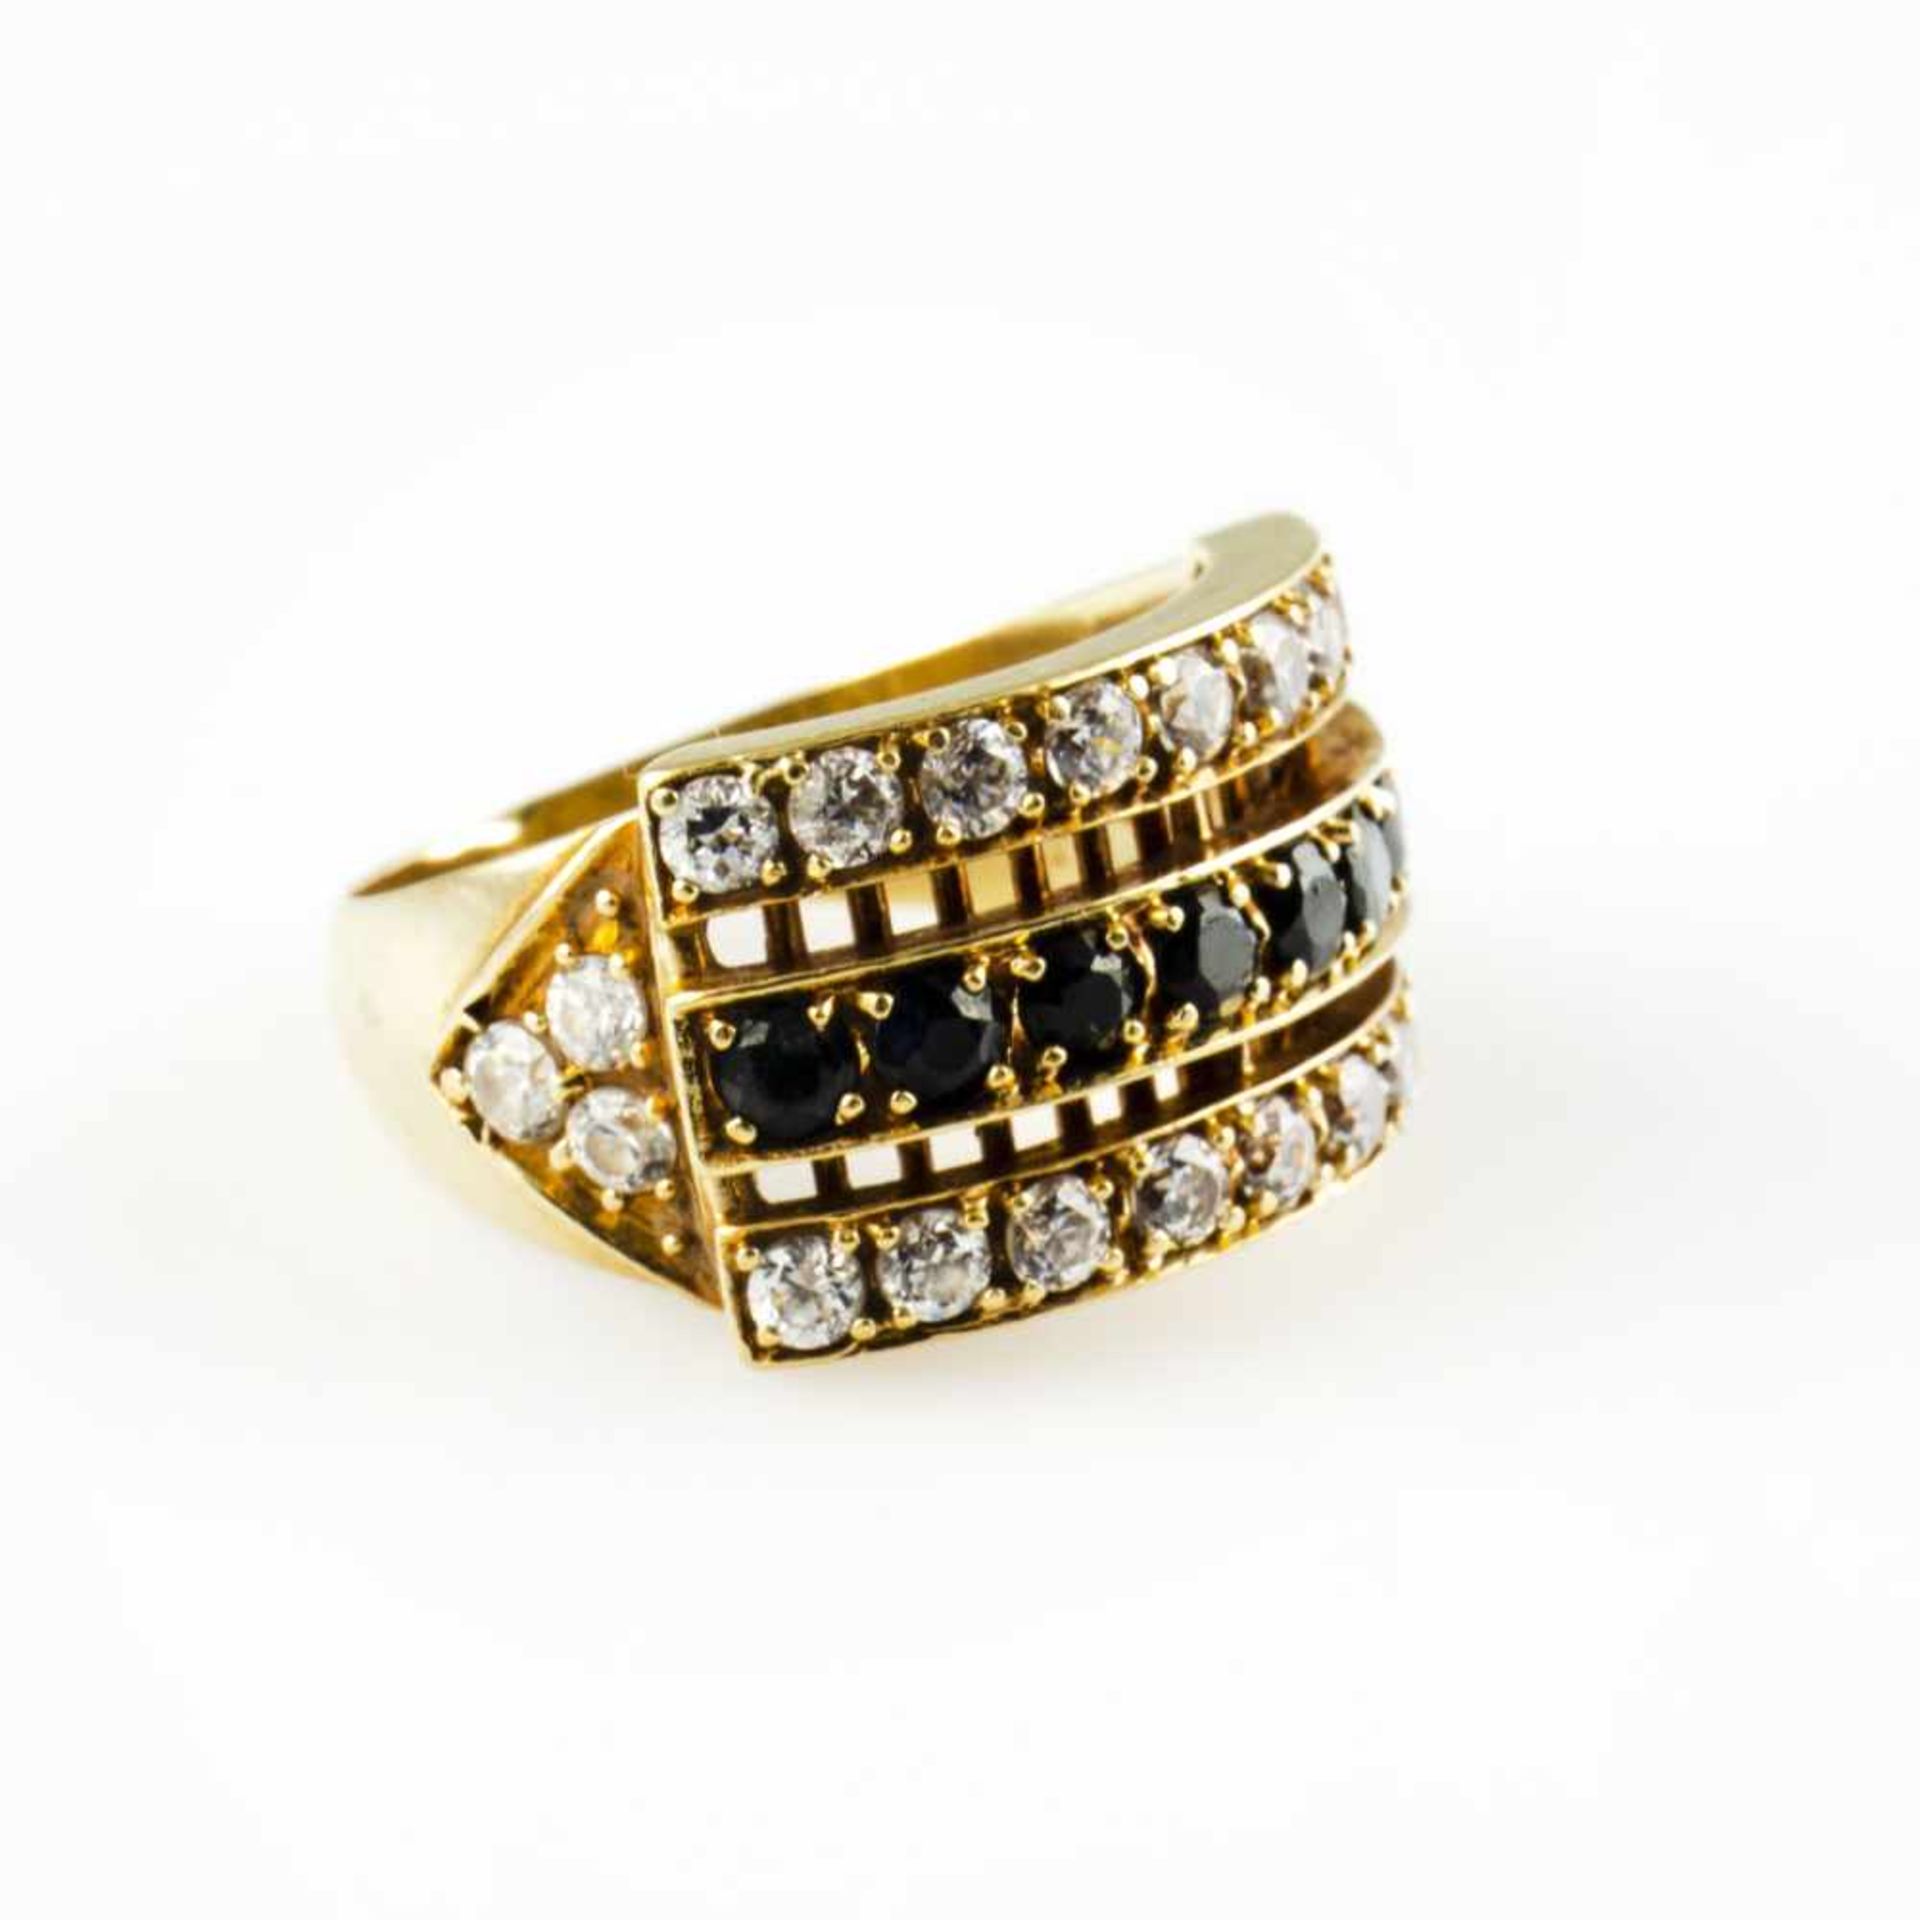 Ladies ring585 yellow gold, with 24 brilliants, total approx. 0.70 ct, vs-p1, JL, 8 faceted dark - Image 3 of 6